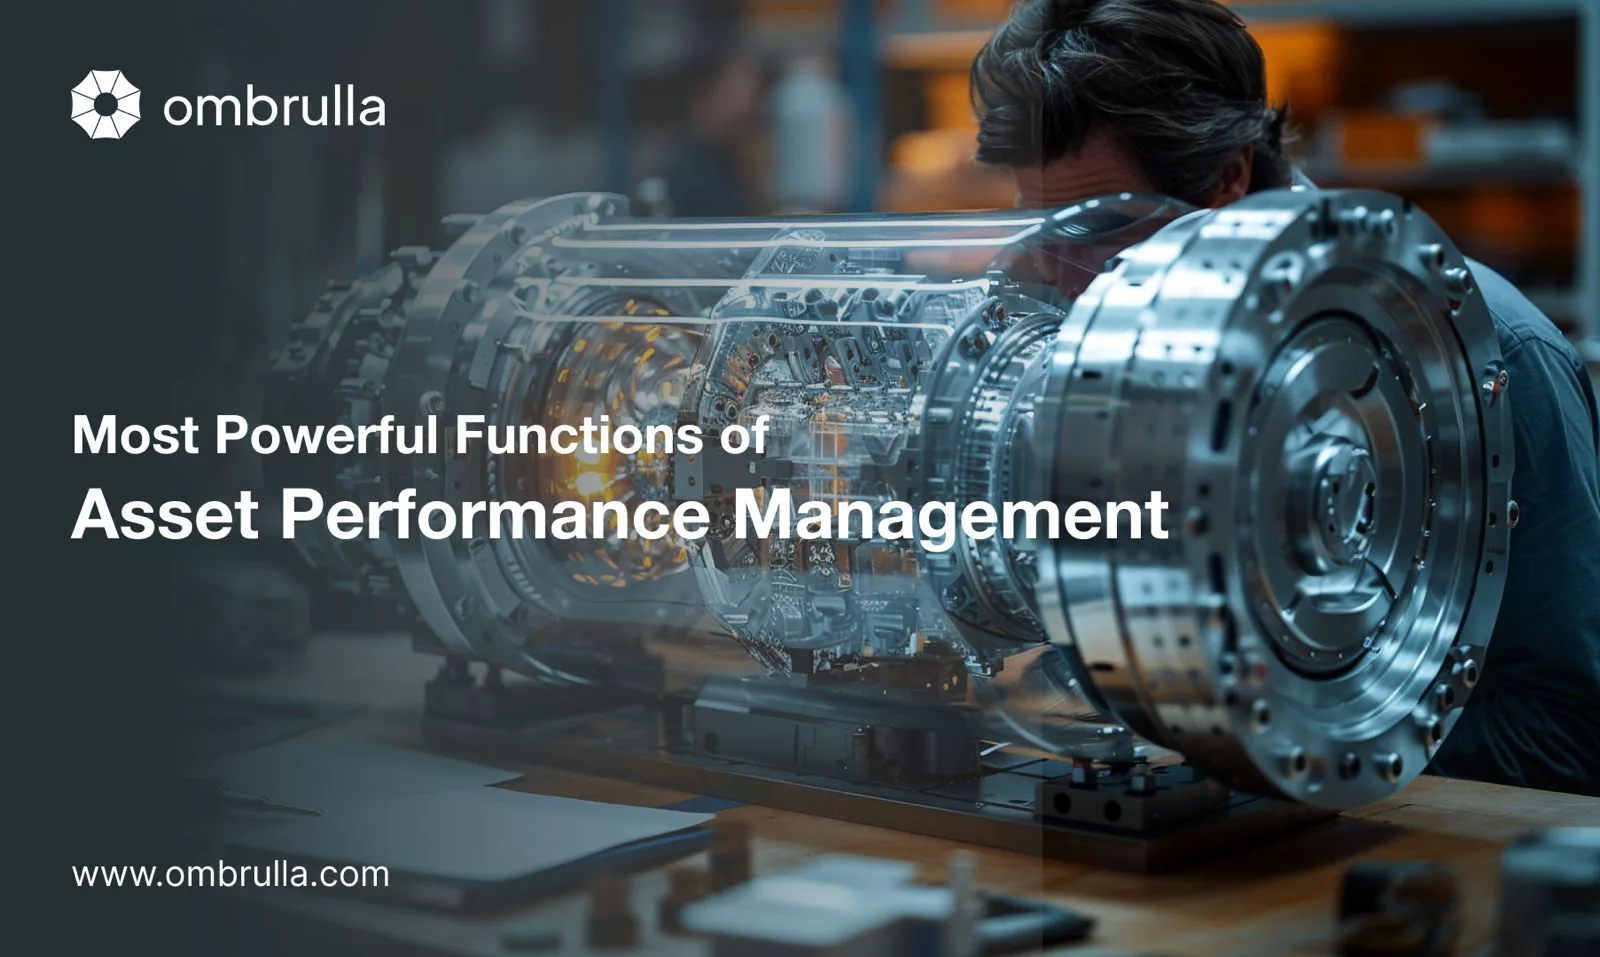 What are the Most Powerful Functions of Asset Performance Management?